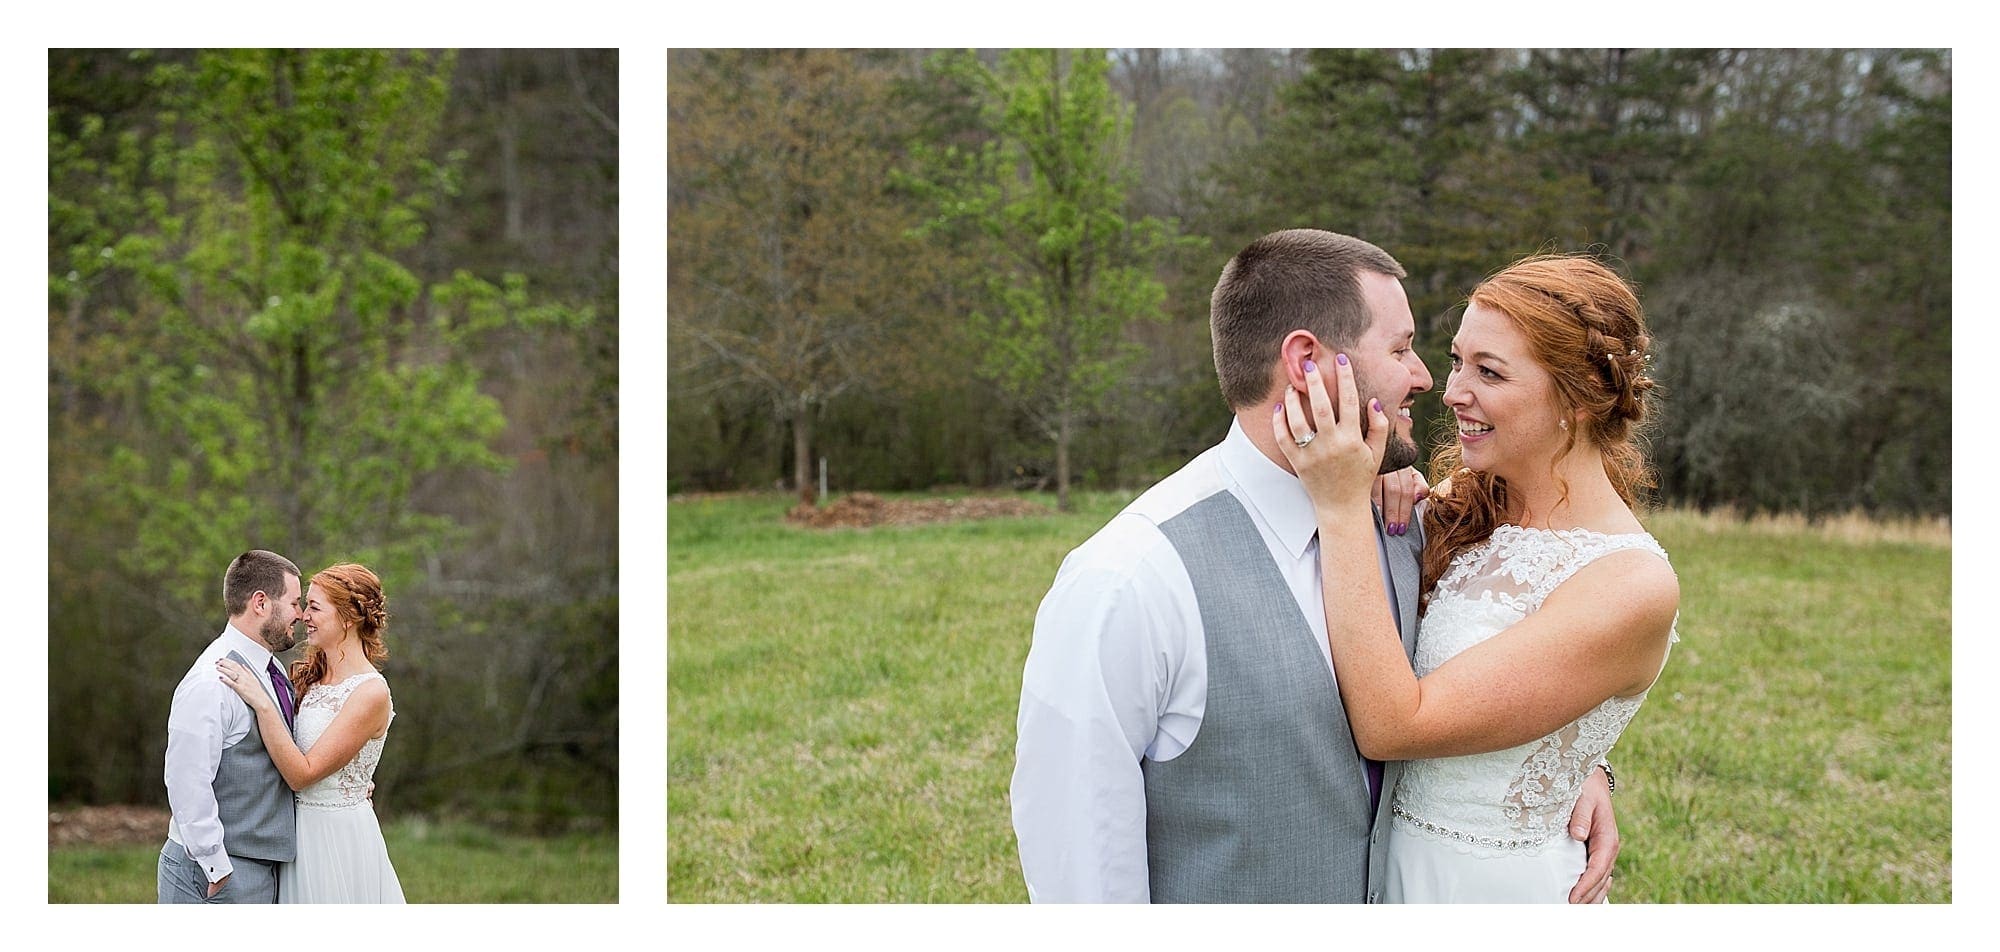 Spring Bride and groom pictures